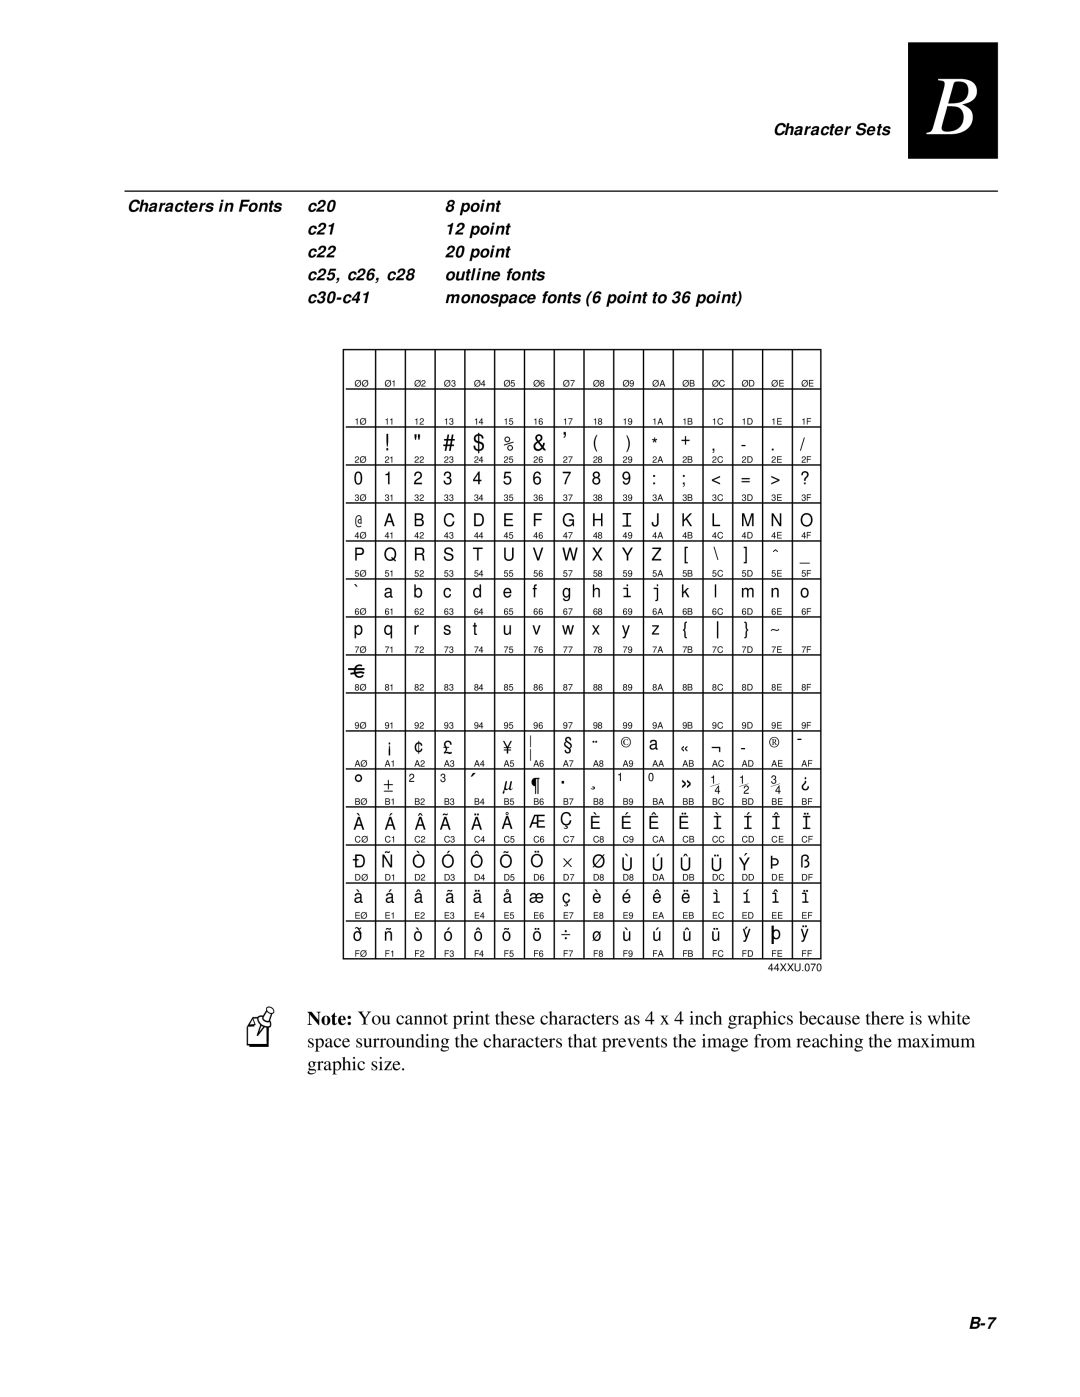 IBM EasyCoder 3400e user manual Characters in Fonts c20, point, c25, c26, c28, outline fonts, c30-c41 